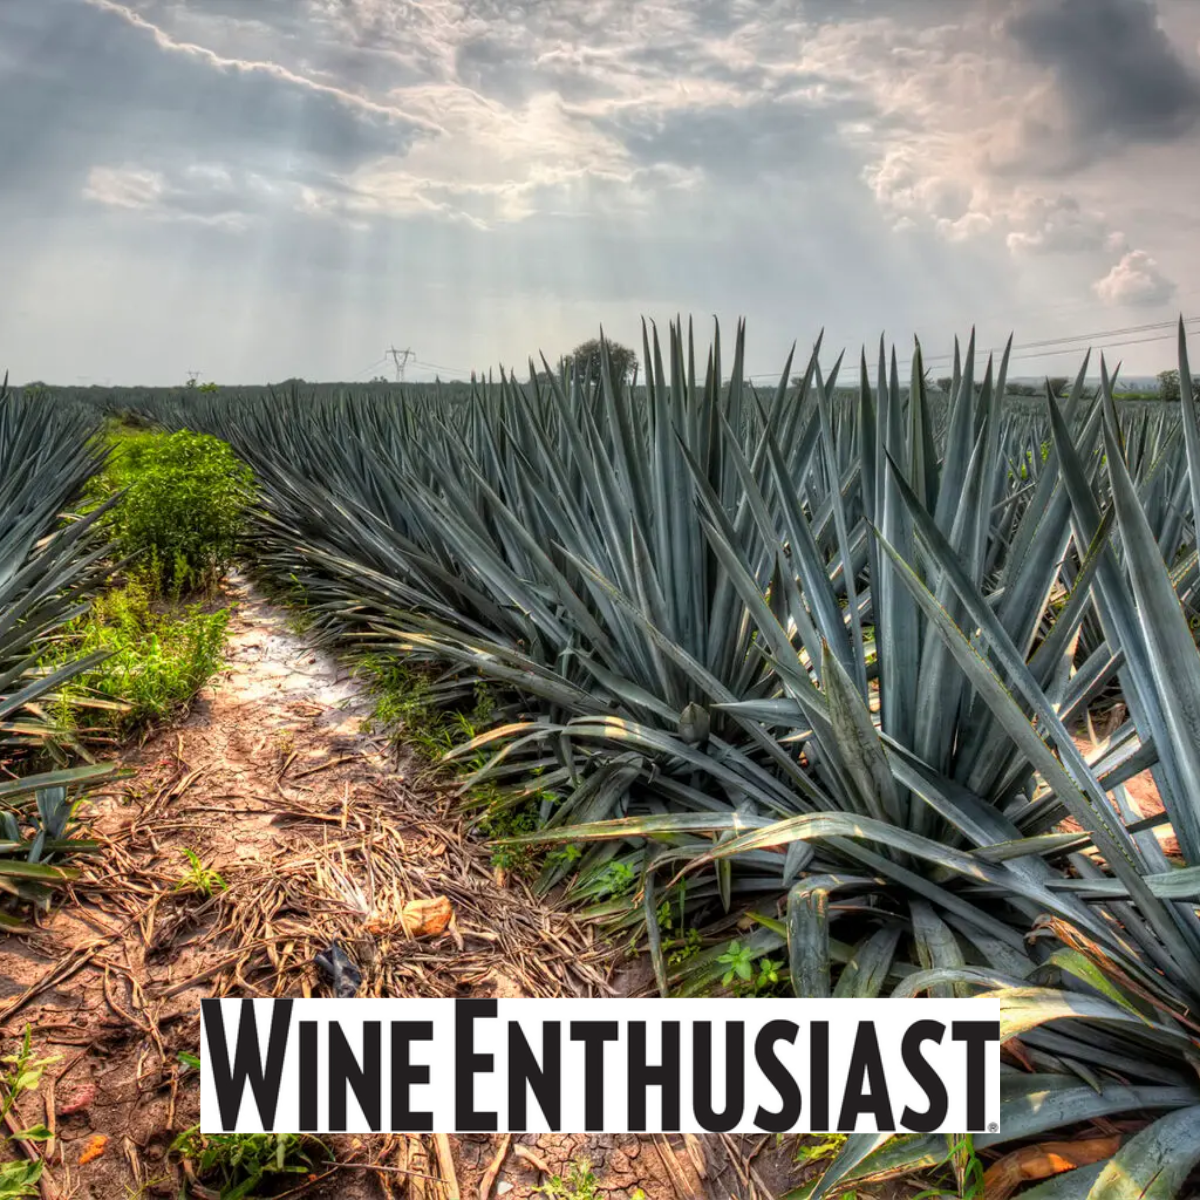 WINE ENTHUSIAST - From $26 to $225, 10 Reposado Tequilas for Every Budget